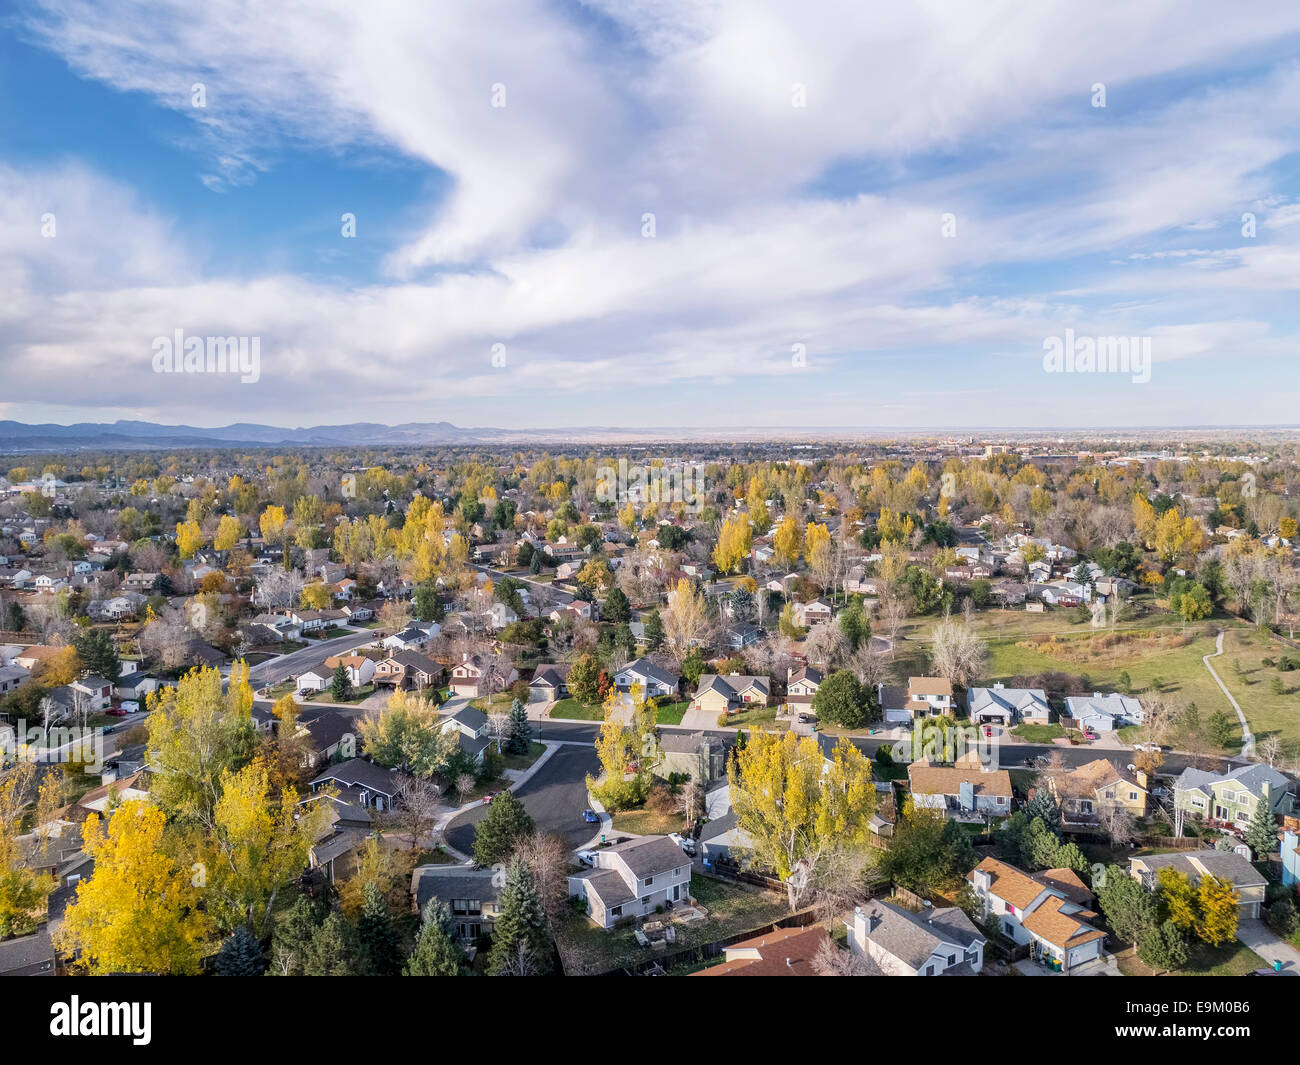 aerial view of Fort Collins residential area, typical along Colorado Front Range, late fall scenery Stock Photo